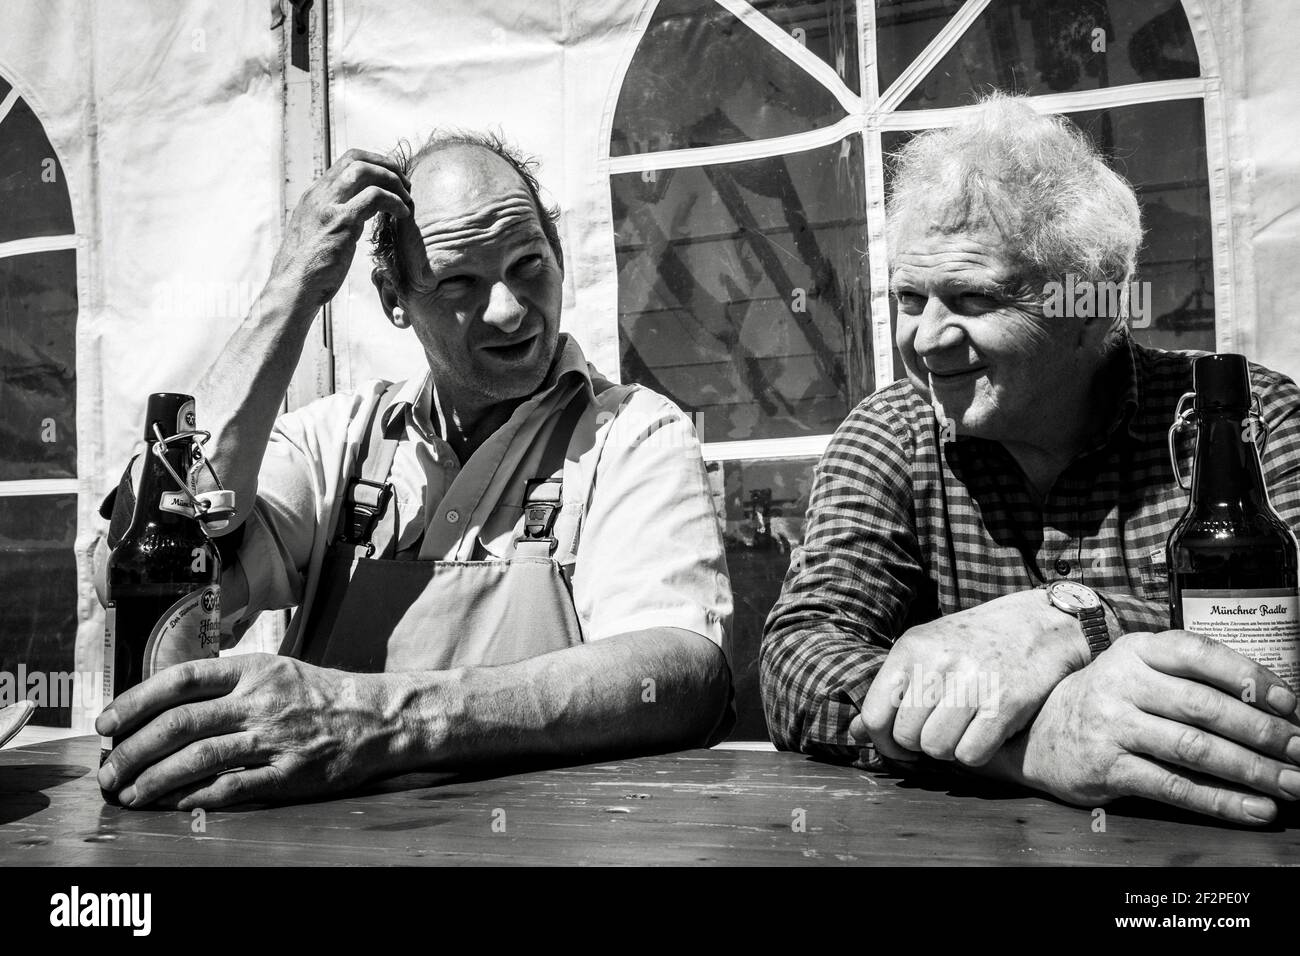 Germany, Bavaria, Antdorf, festival week of the traditional costume association. Two men take a break while setting up the marquee and drink beer. Stock Photo